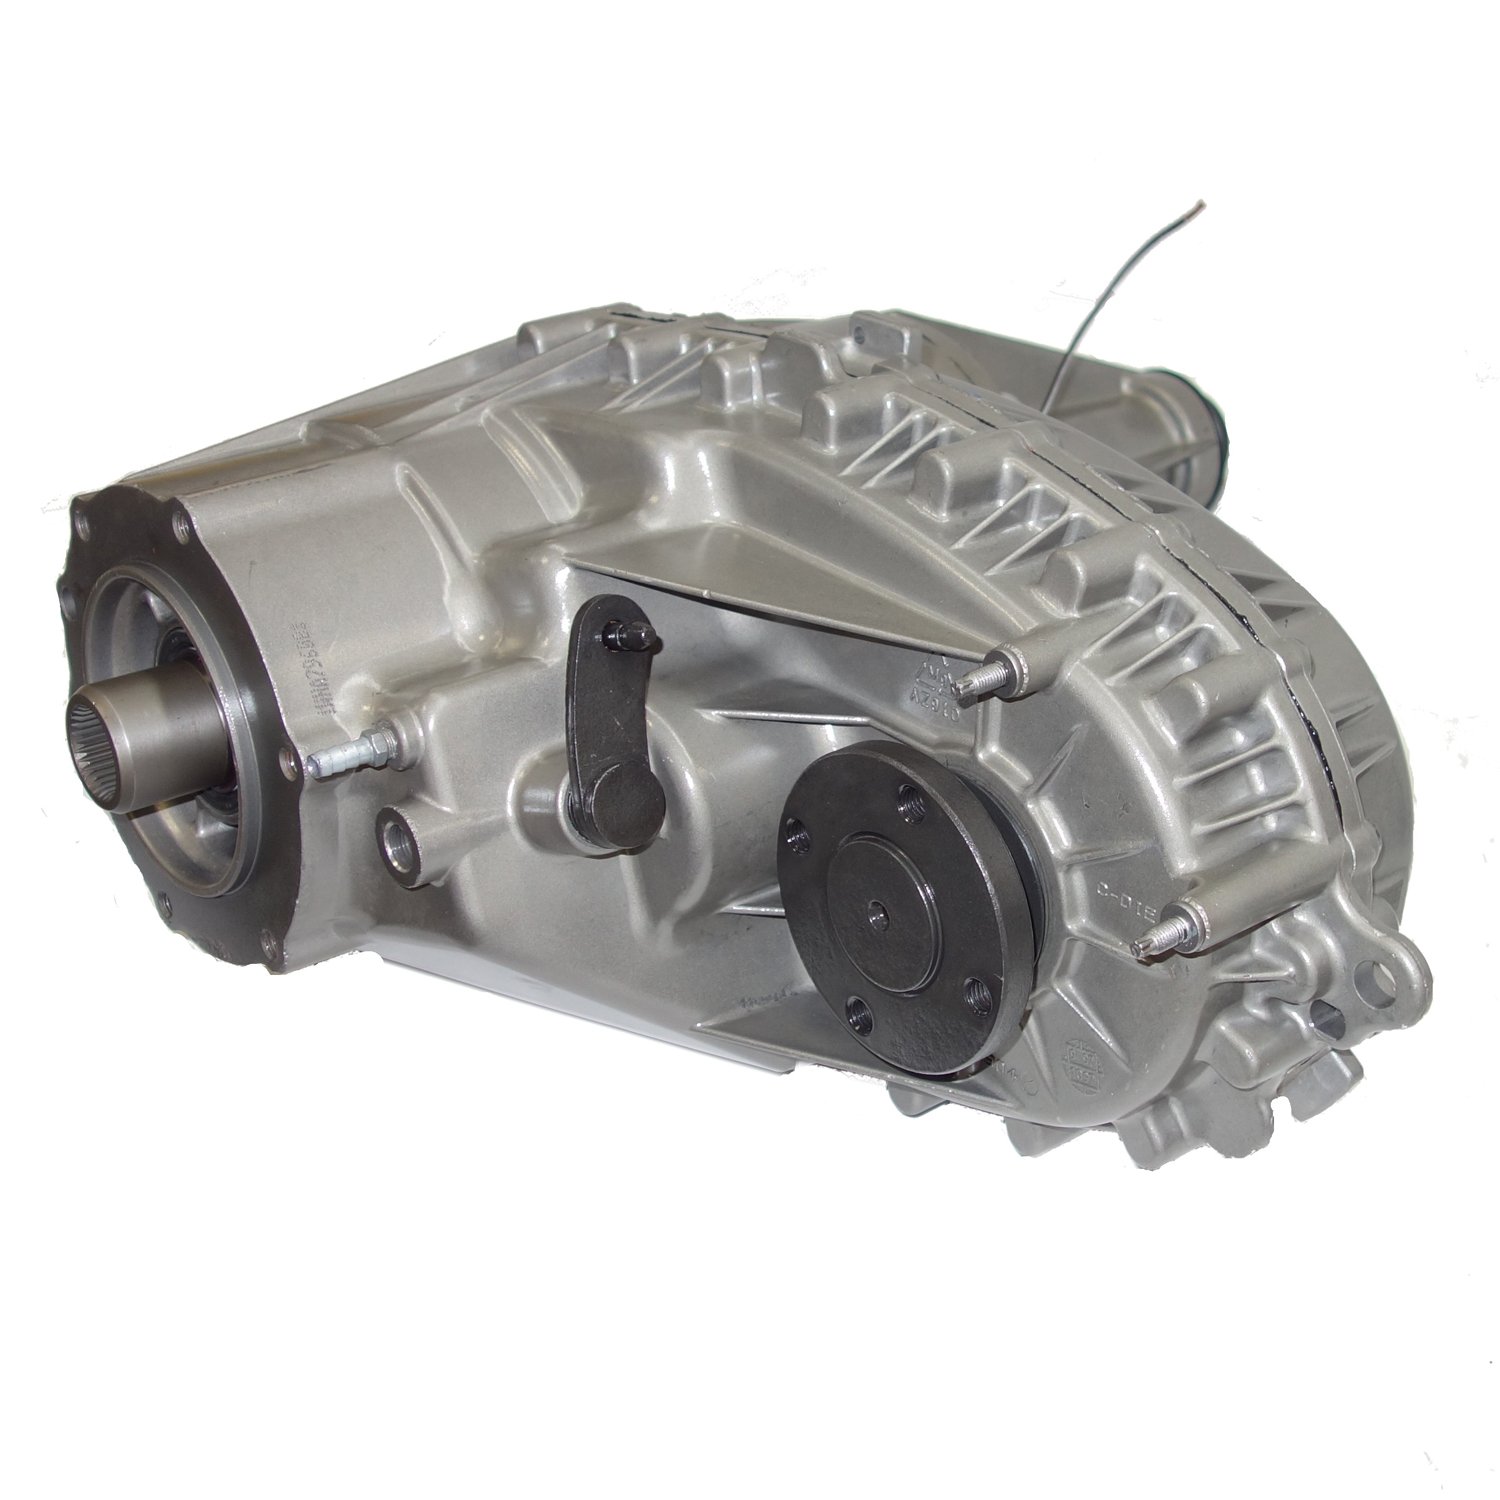 Remanufactured BW4406 Transfer Case for Ford 96-98 F150/F250